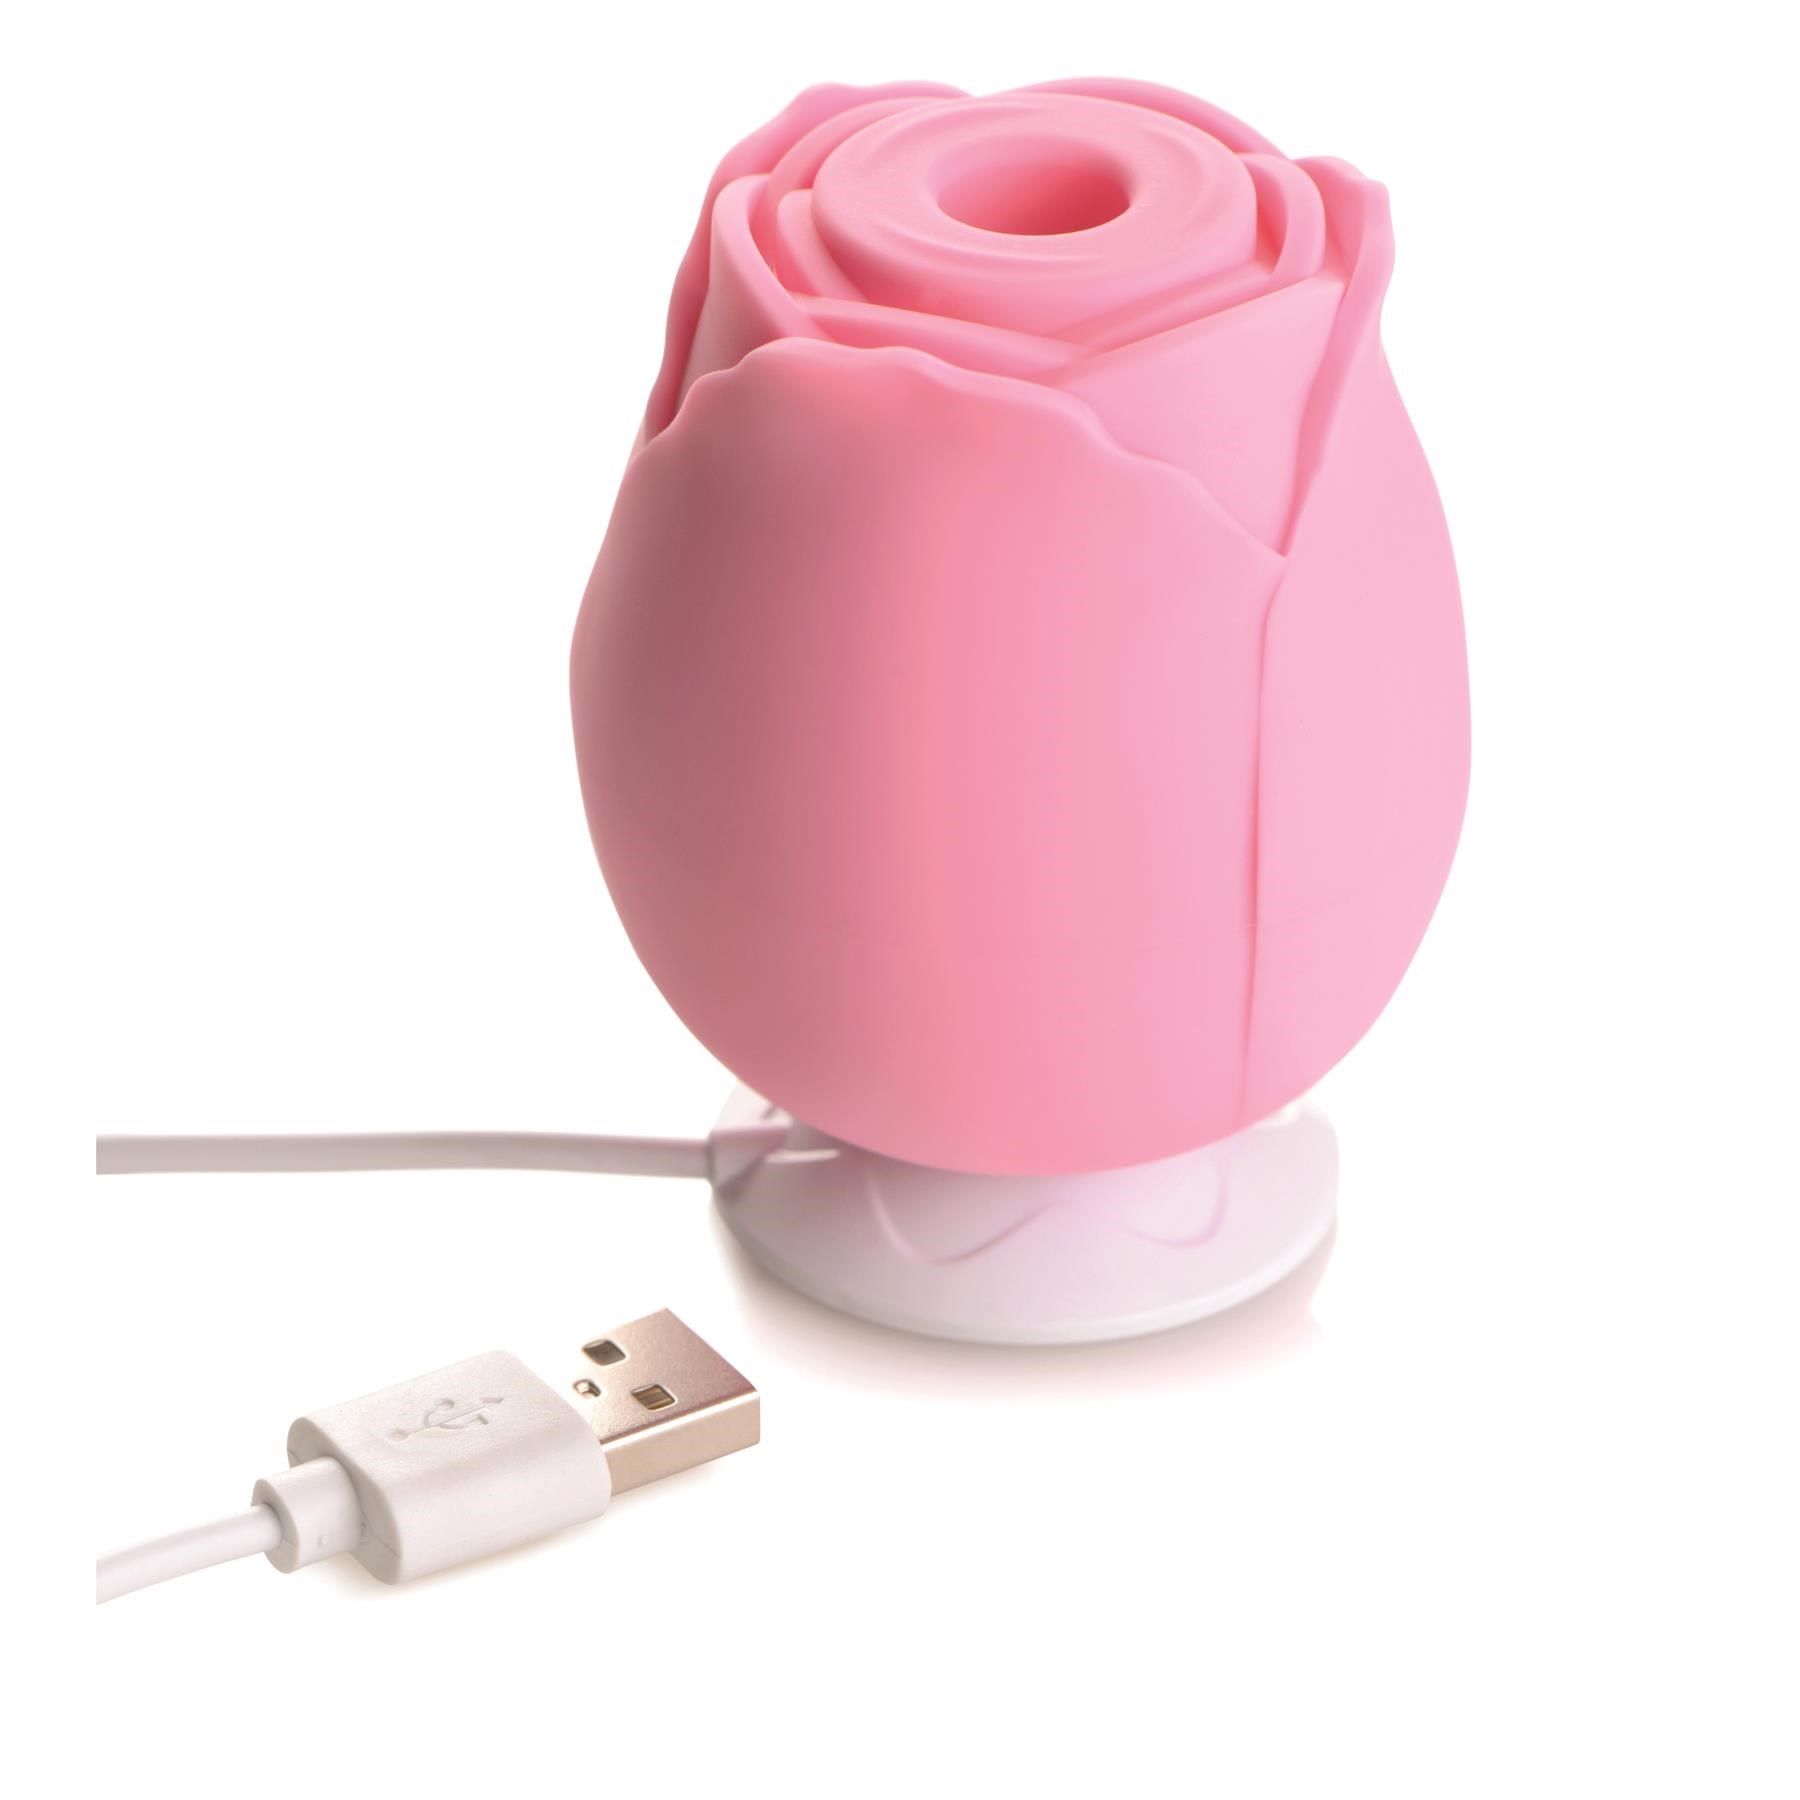 Bloomgasm Suction Rose Clitoral Stimulator Showing How to Charge - Pink